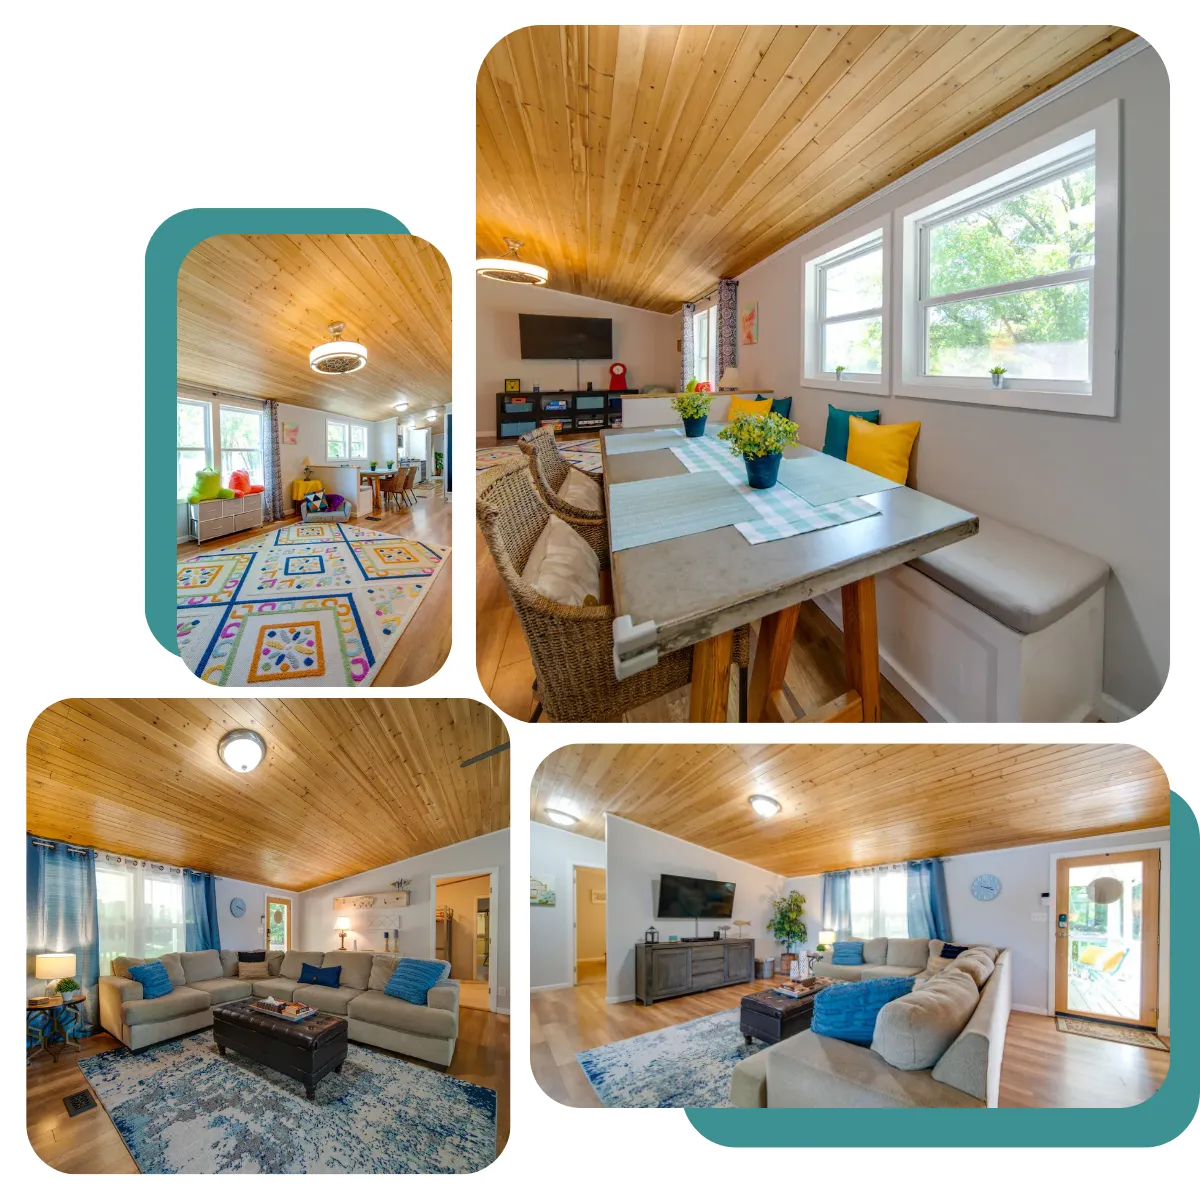 Relax at Lake Wylie Retreat with cozy furniture, ample sunlight, 5 bedrooms, a kids' playroom, and spacious dining for 10+. Enjoy the vast deck with views of the lake and backyard for a wonderful getaway.